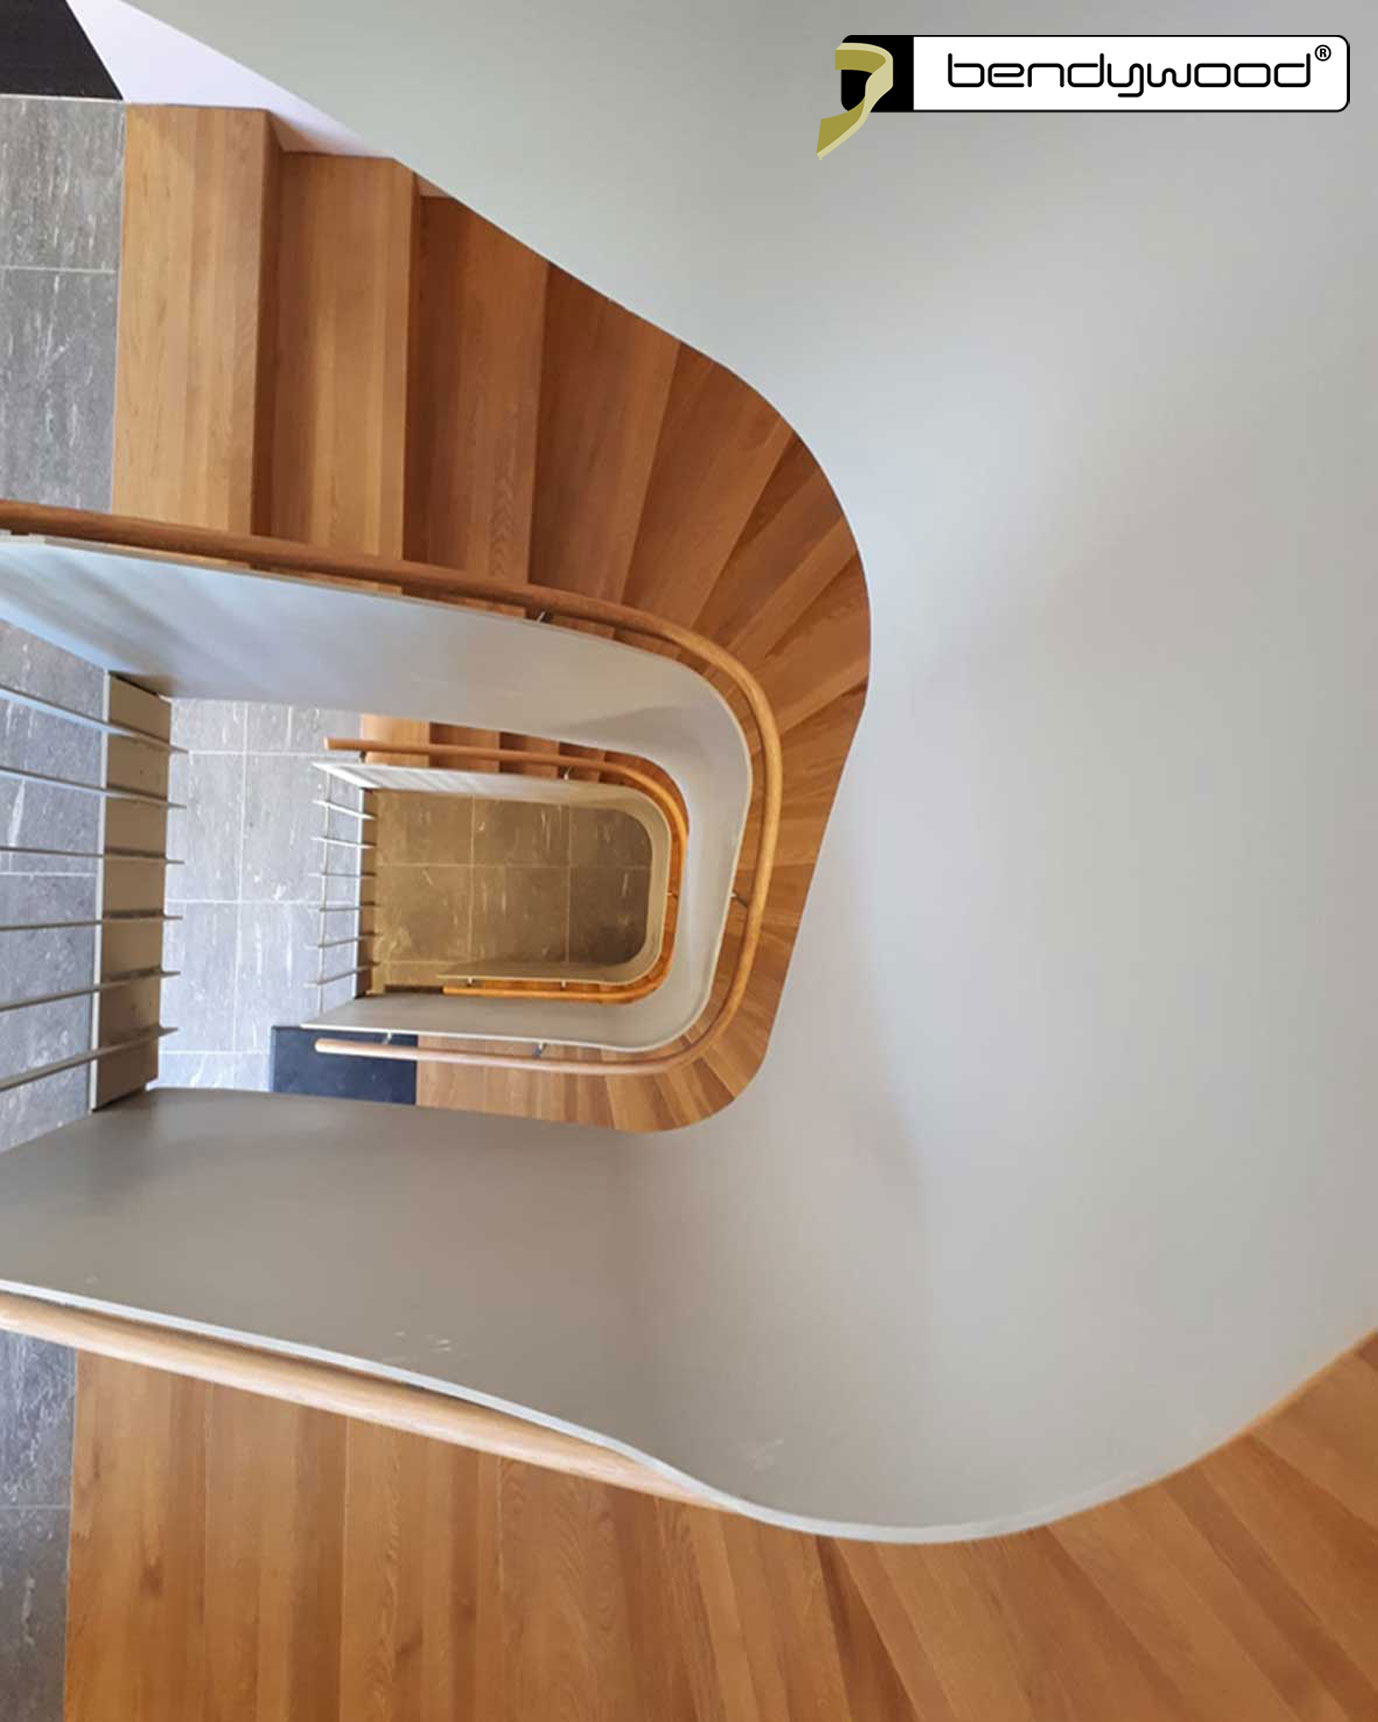 Round bending handrails in Bendywood®-oak fitted on a 10 mm thick curved steel plate stair railing.